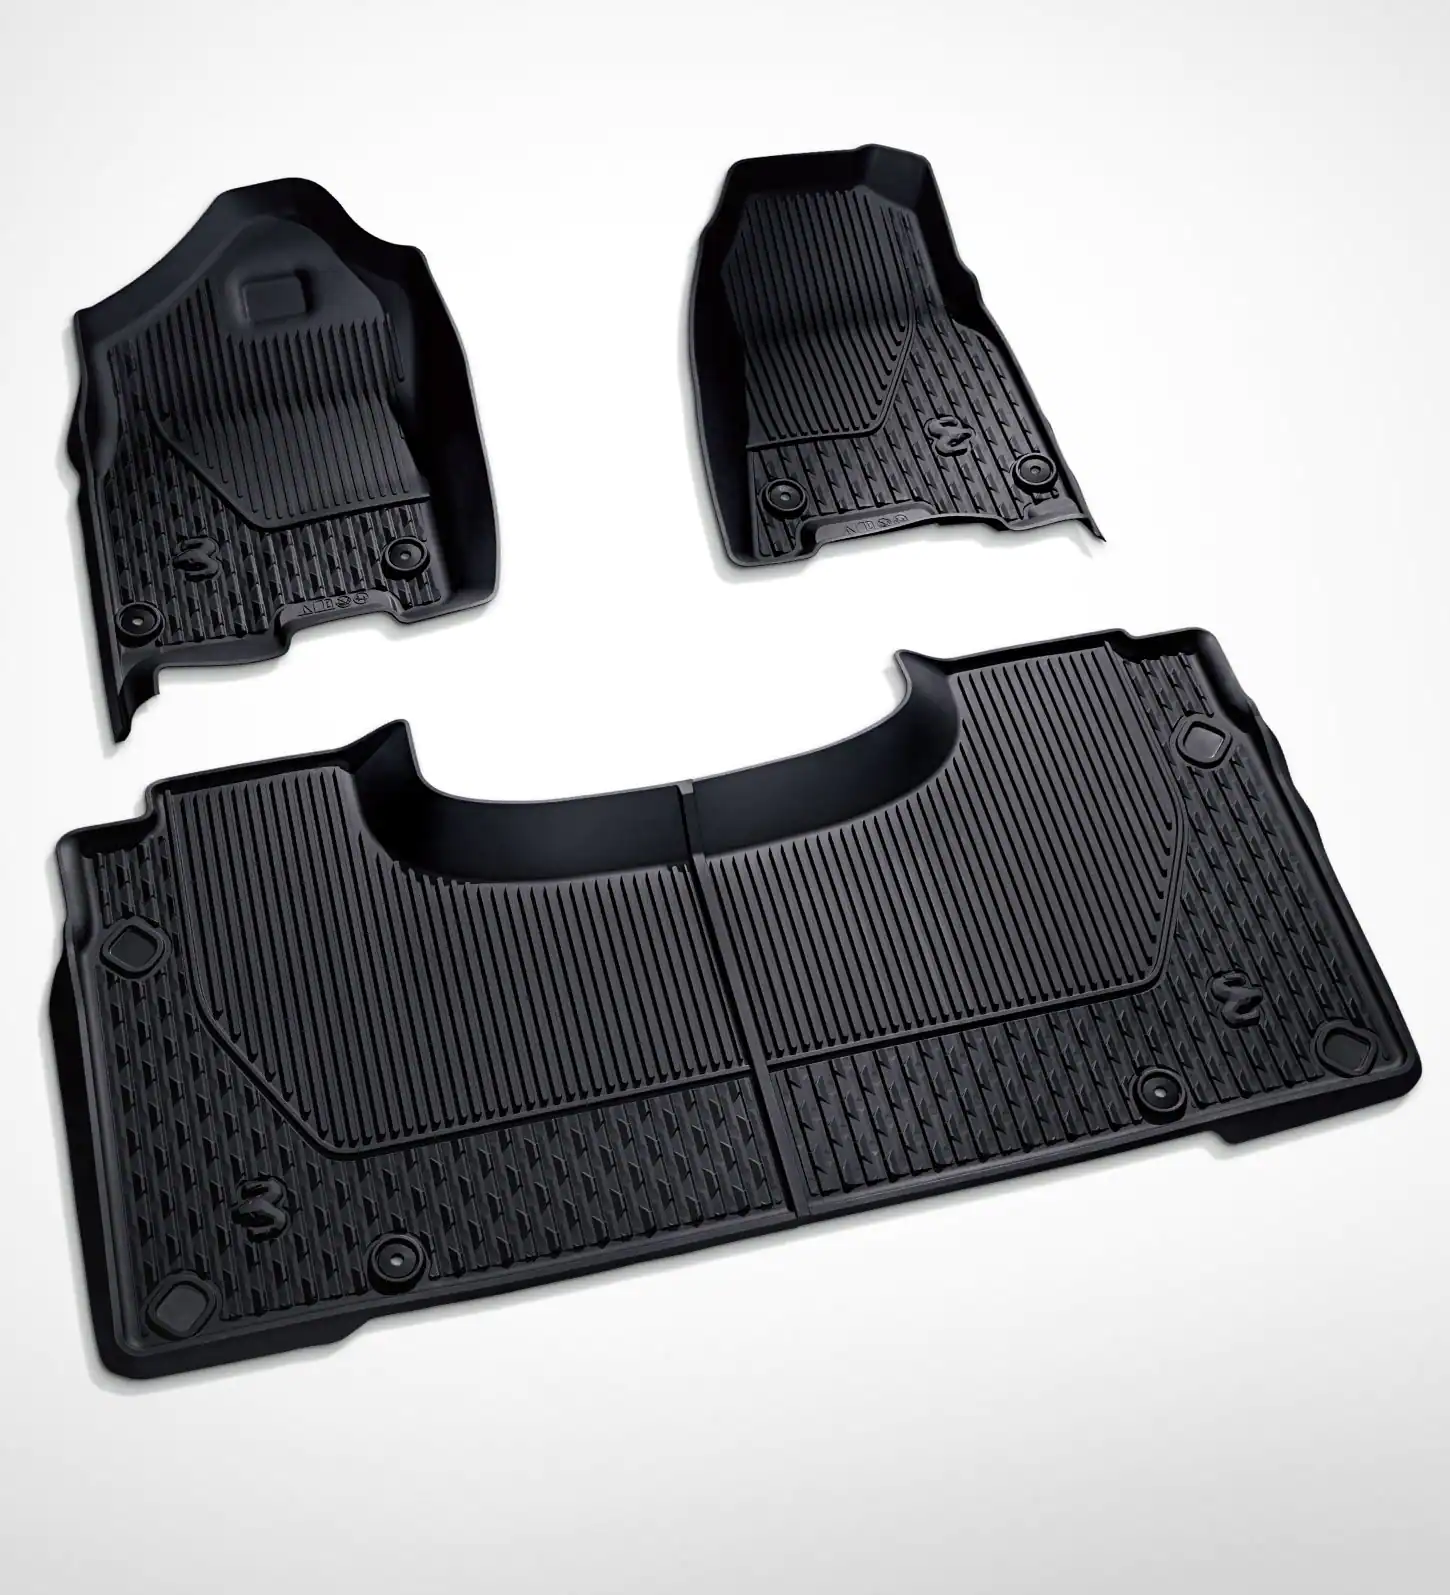 2023 RAM 1500 available all weather mat kit